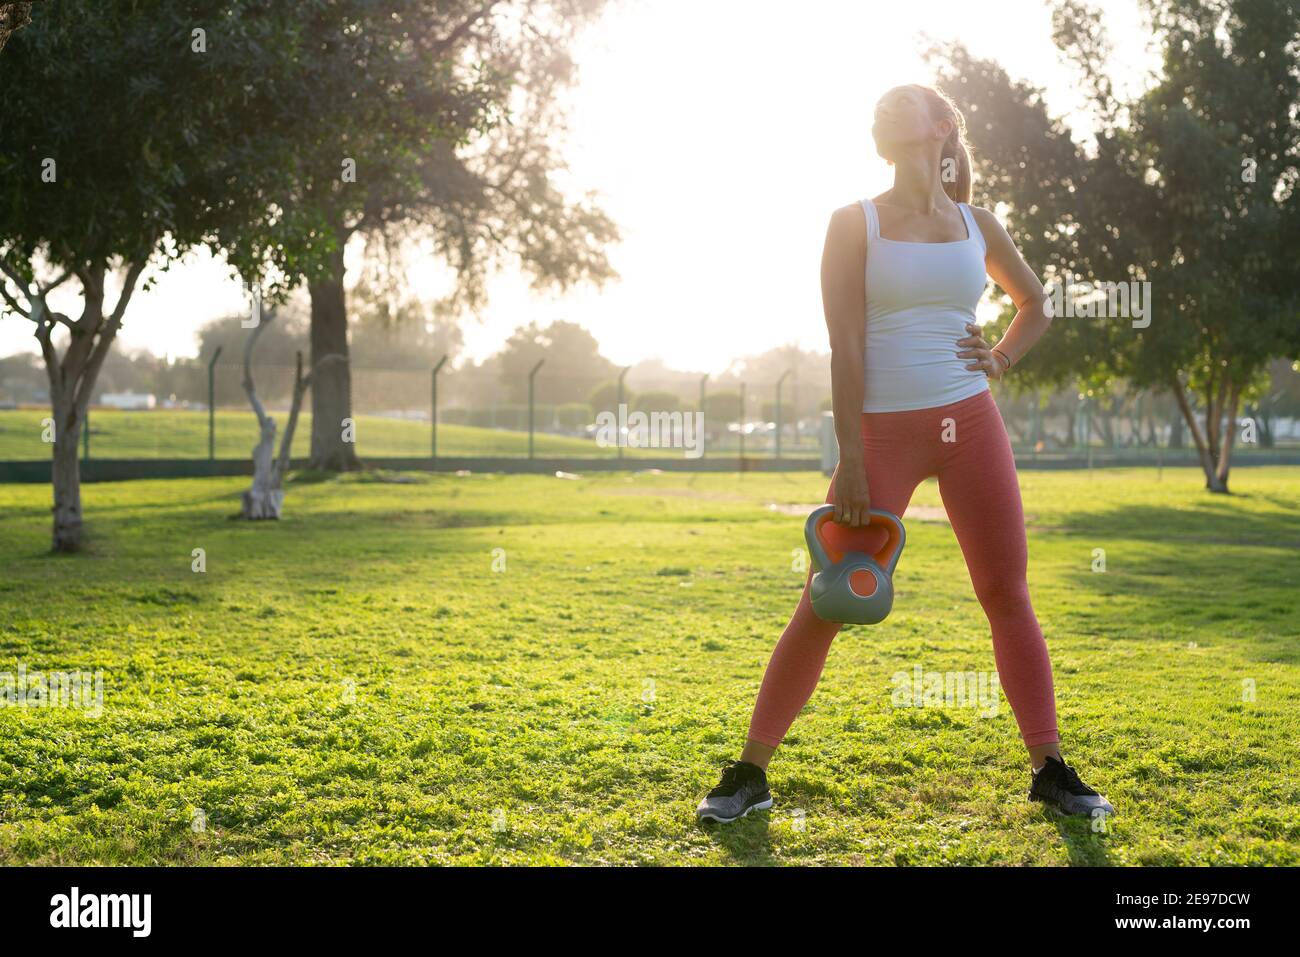 A youthful woman engages in exercises amidst the greenery of the park ...